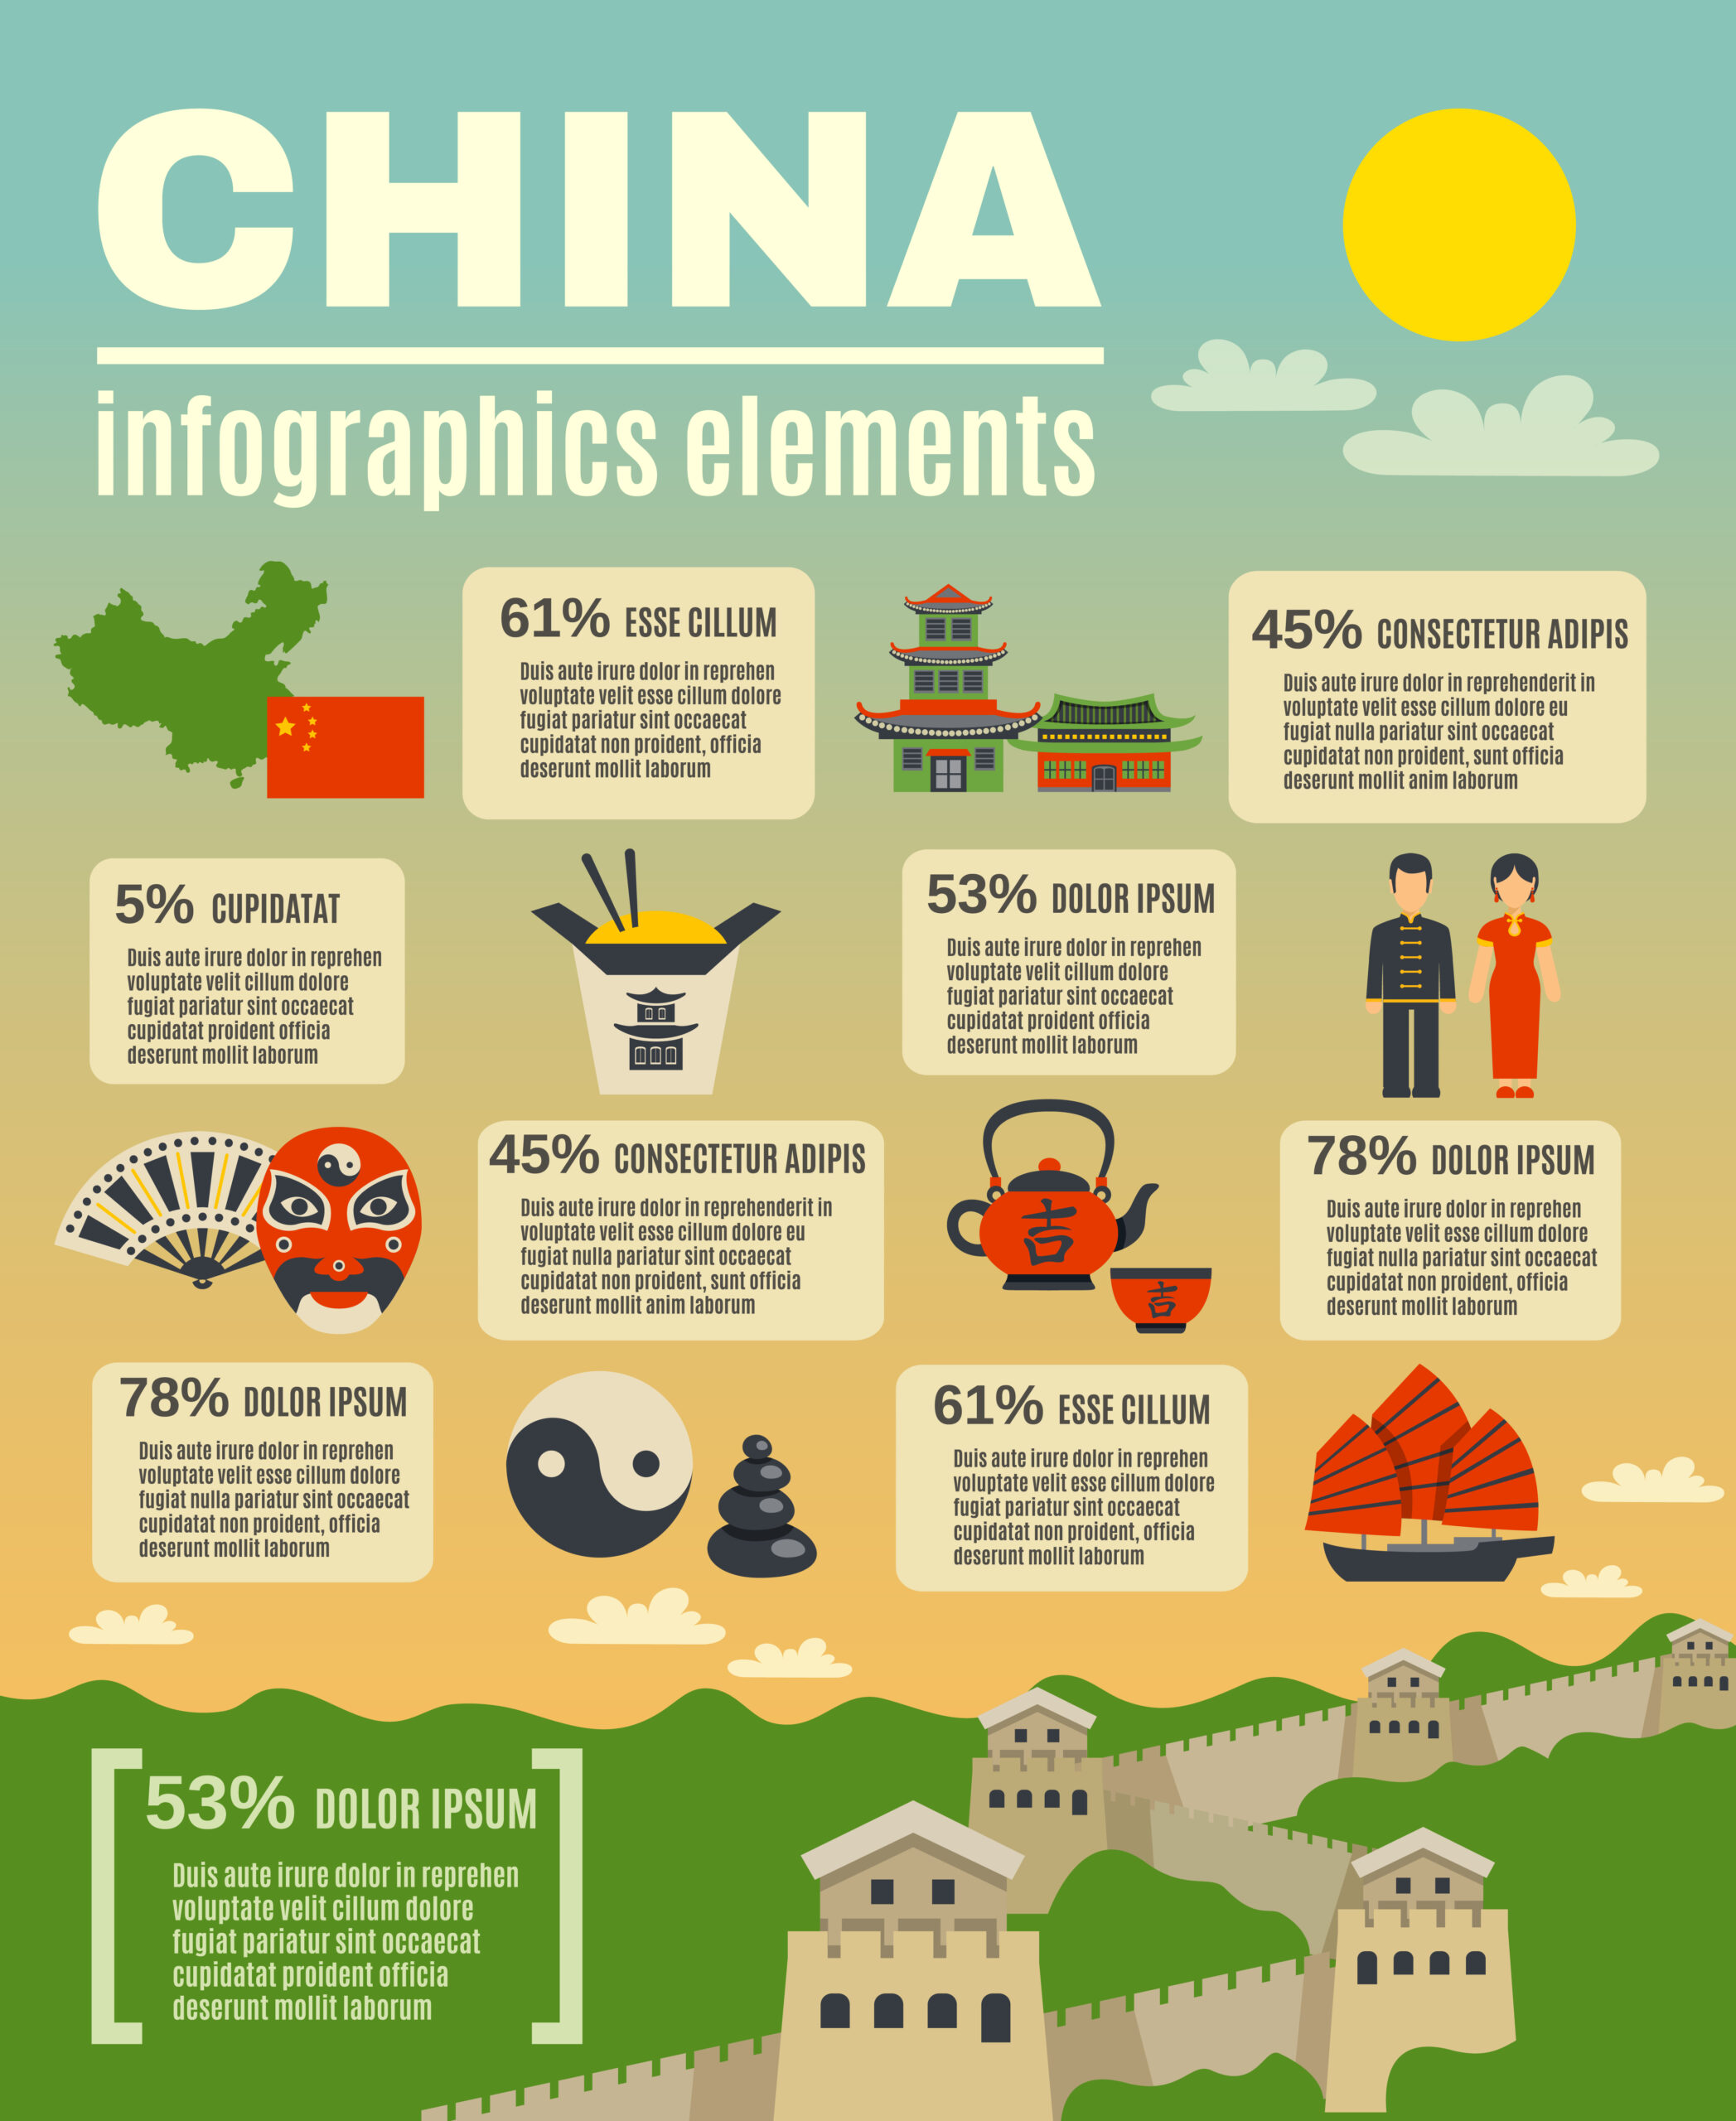 Chinese New Year and psychology [infographic] | OUPblog